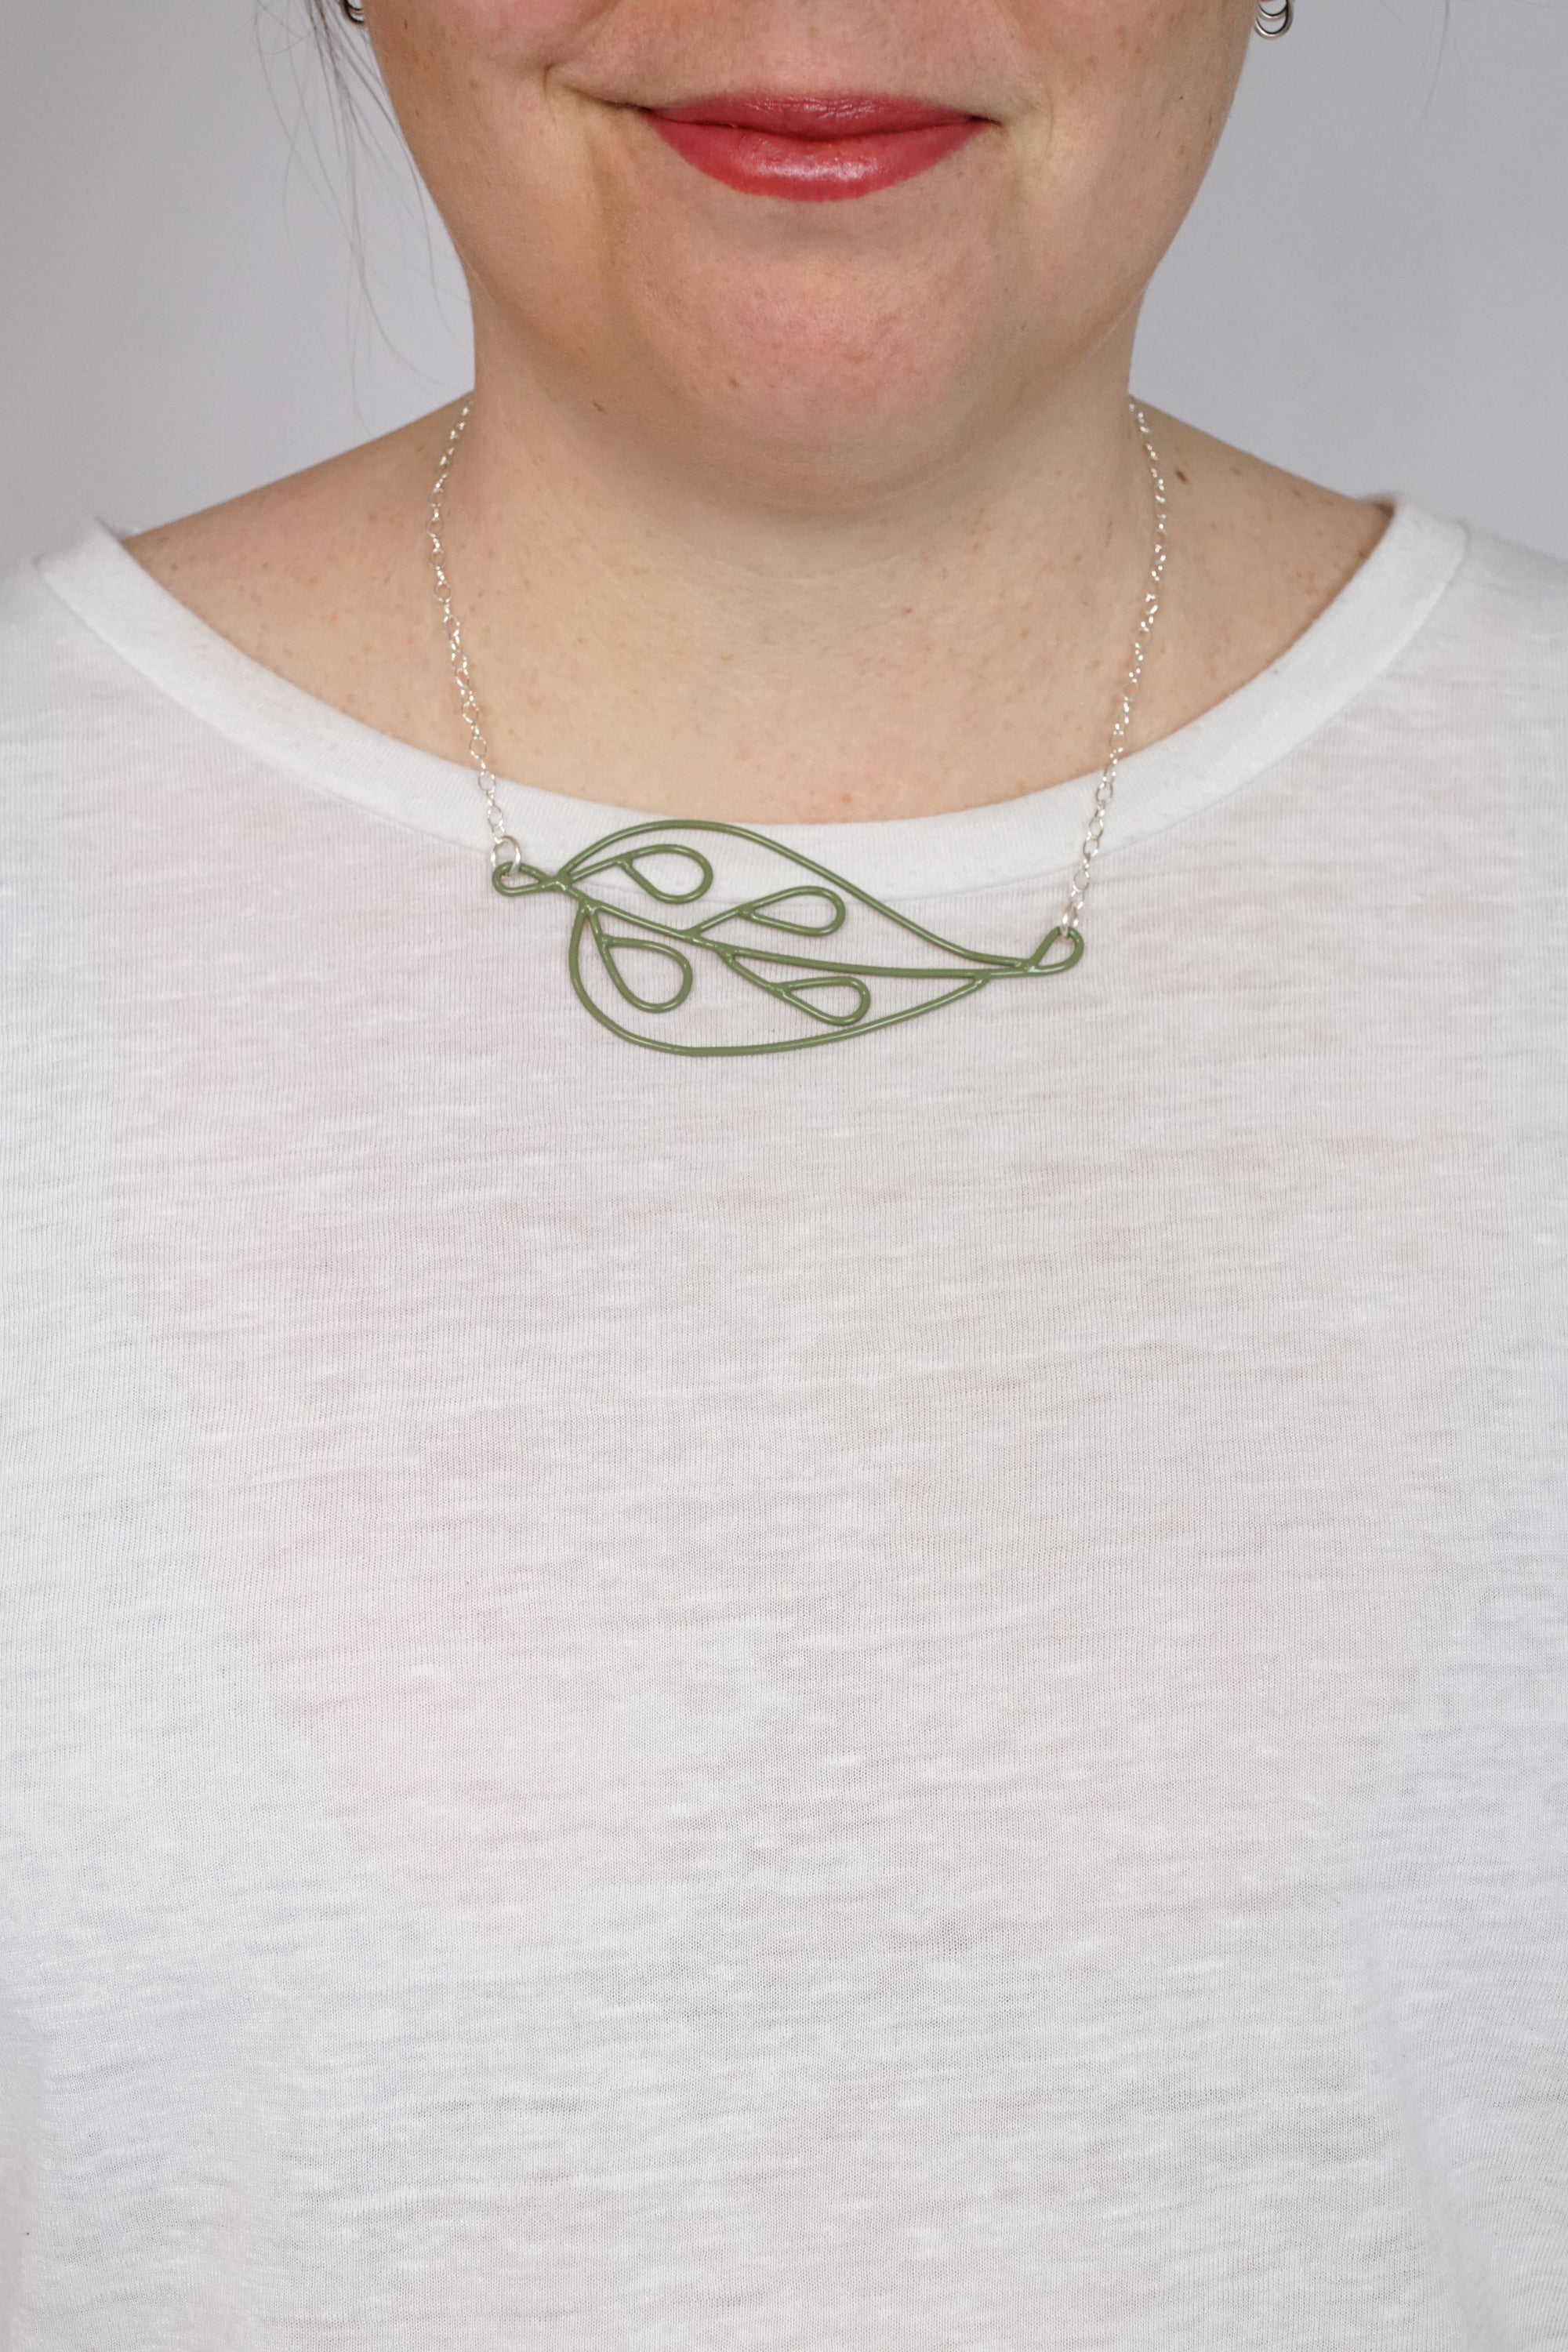 Horizontal Ada Necklace in Olive Green